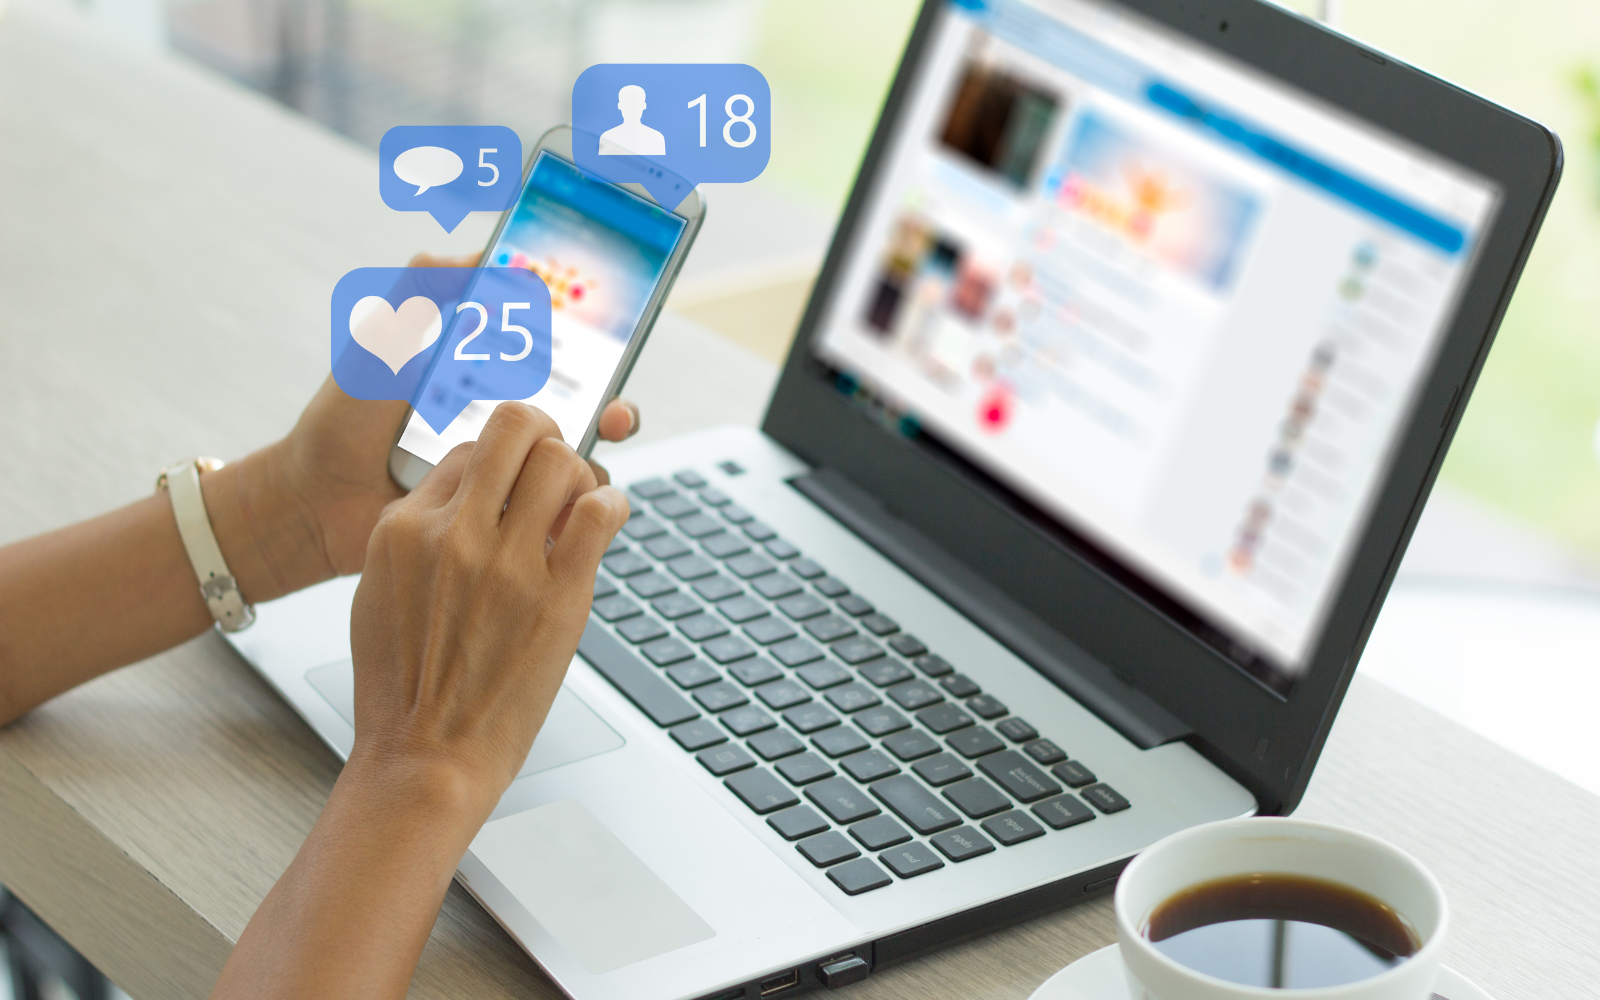 The image displays someone sitting at a laptop and holding a phone with icons figuratively emerging from a smartphone. The icons demonstrate the power of other platform alternatives to Instagram.